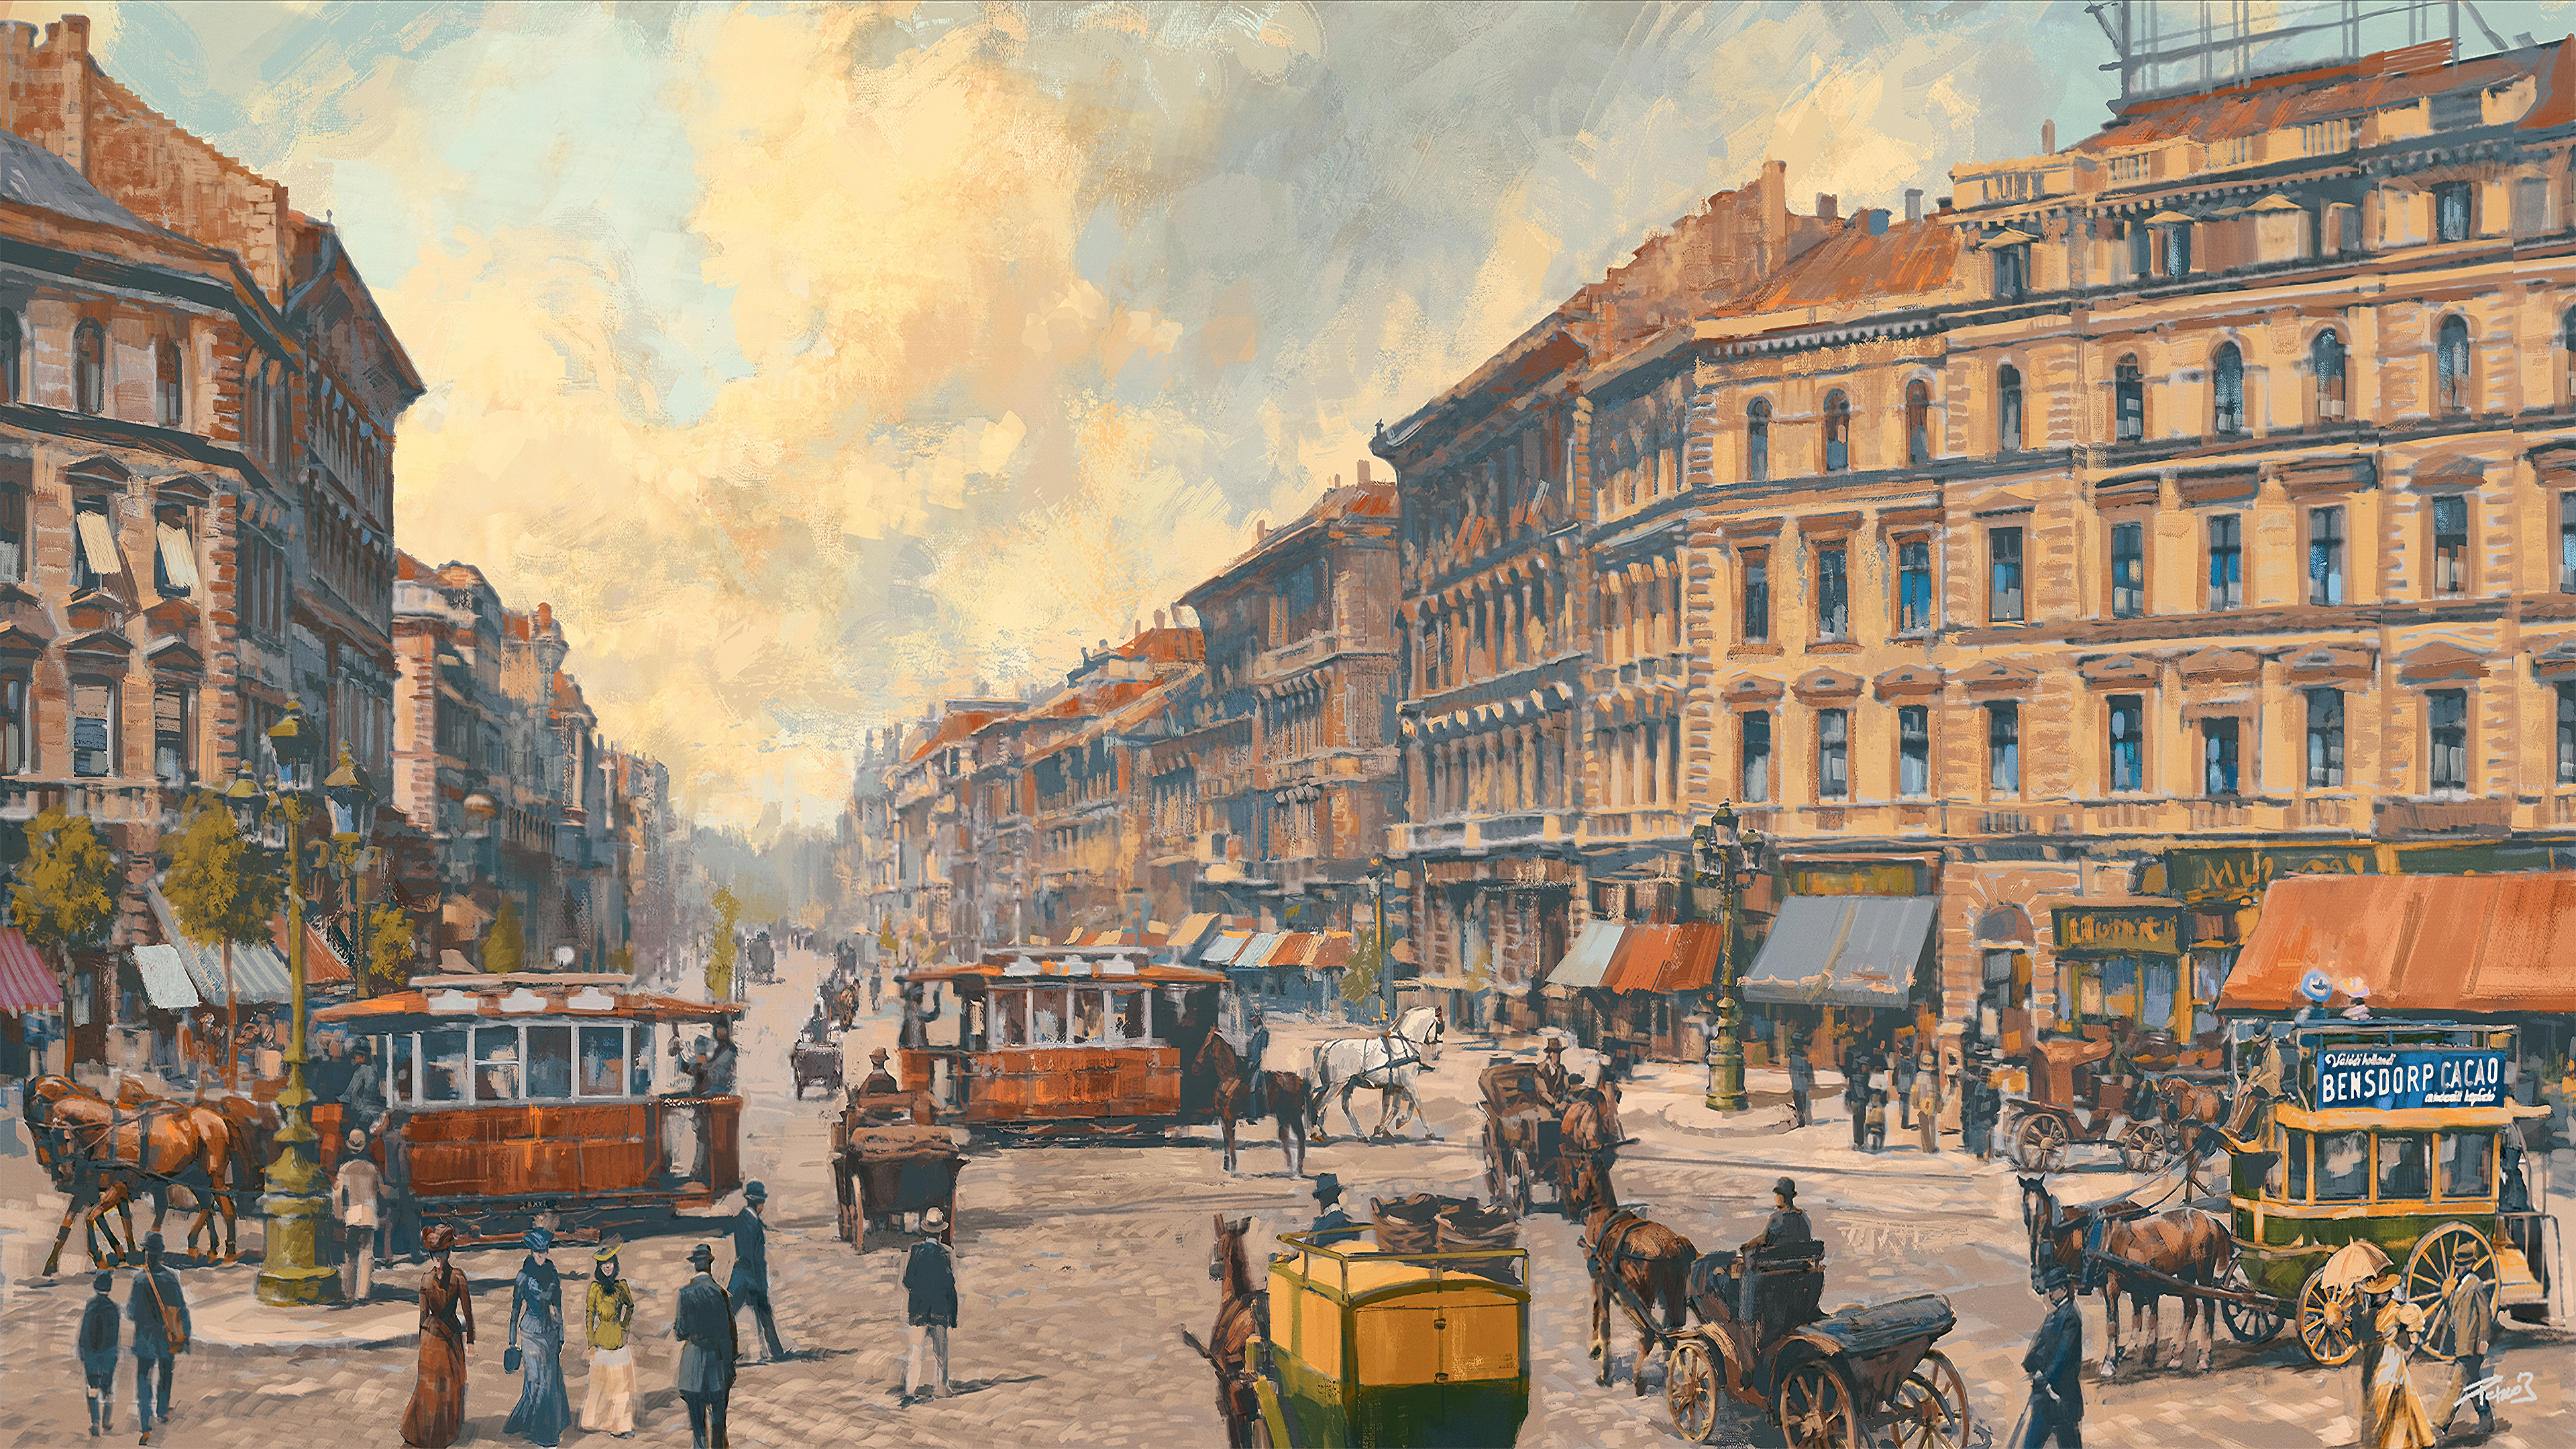 Artwork Painting Tram Building People Stores Budapest Balazs Pethe 3840x2160